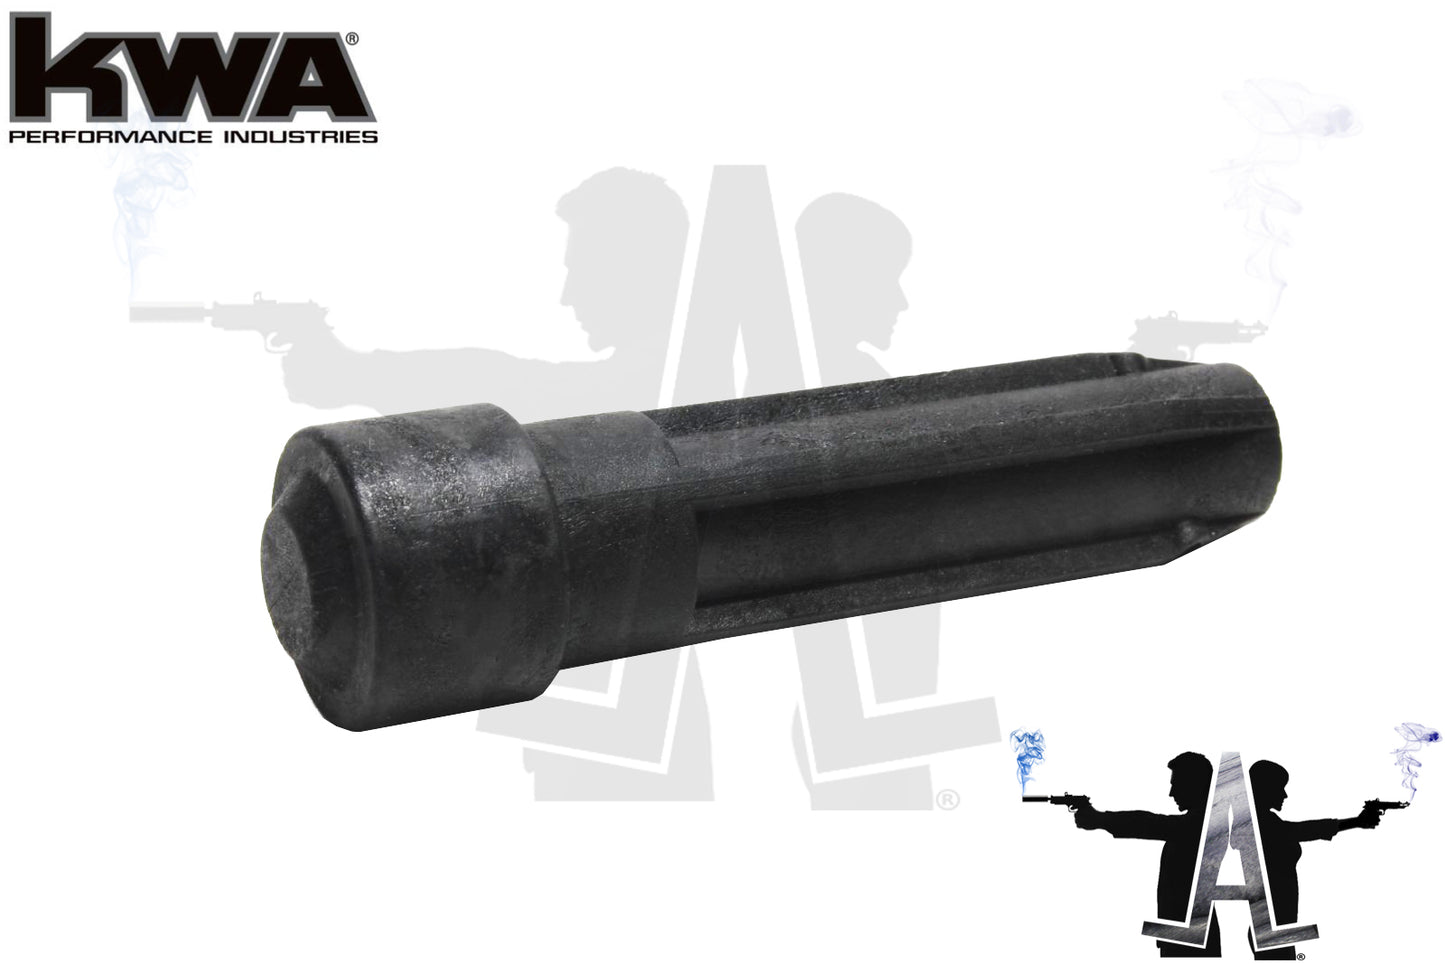 KWA Reinforced Poly-Carbon Buffer Recoil Unit